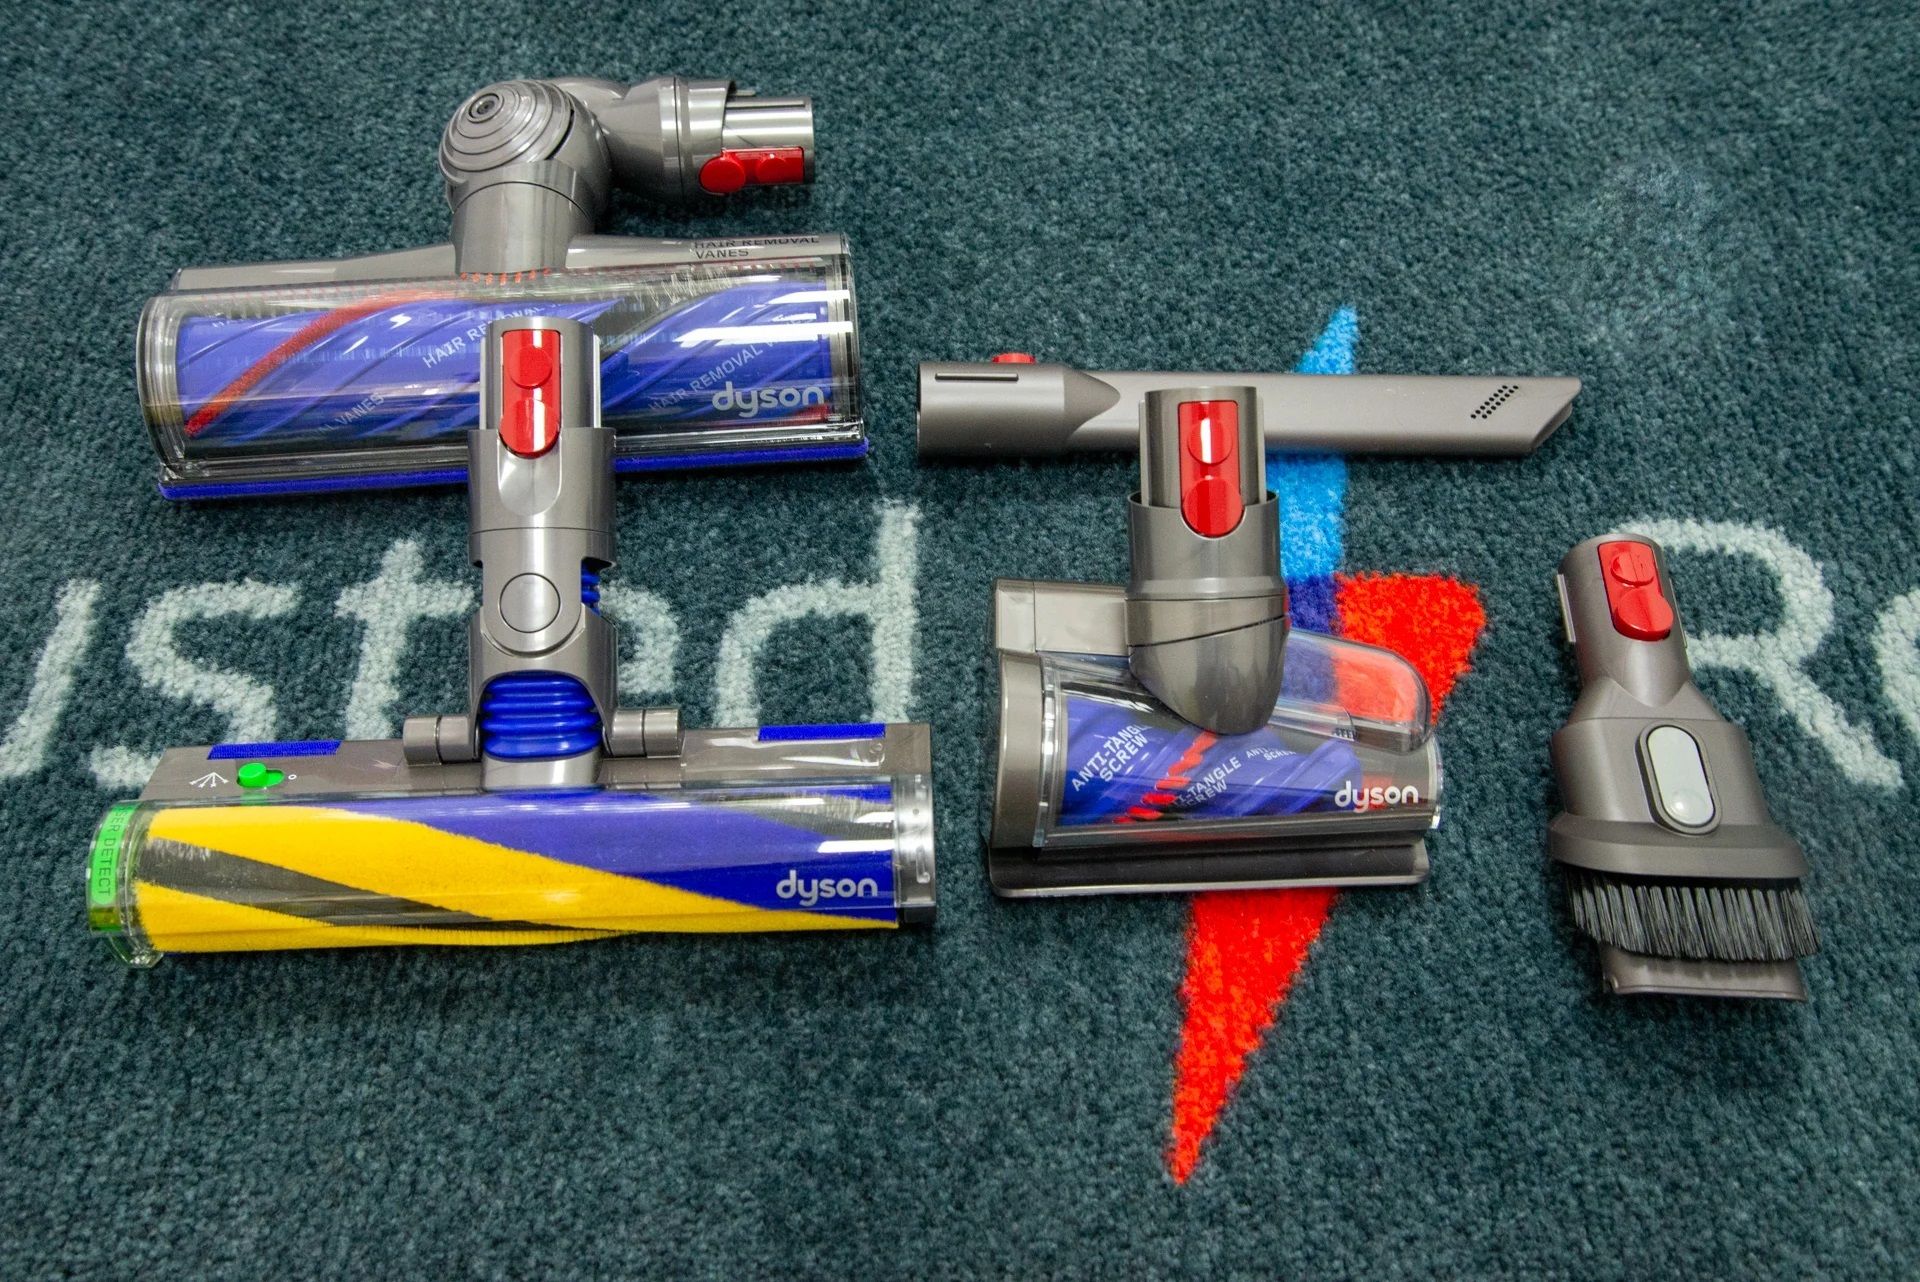 Dyson introduced Dyson V15 Detect cordless vacuum cleaner in India